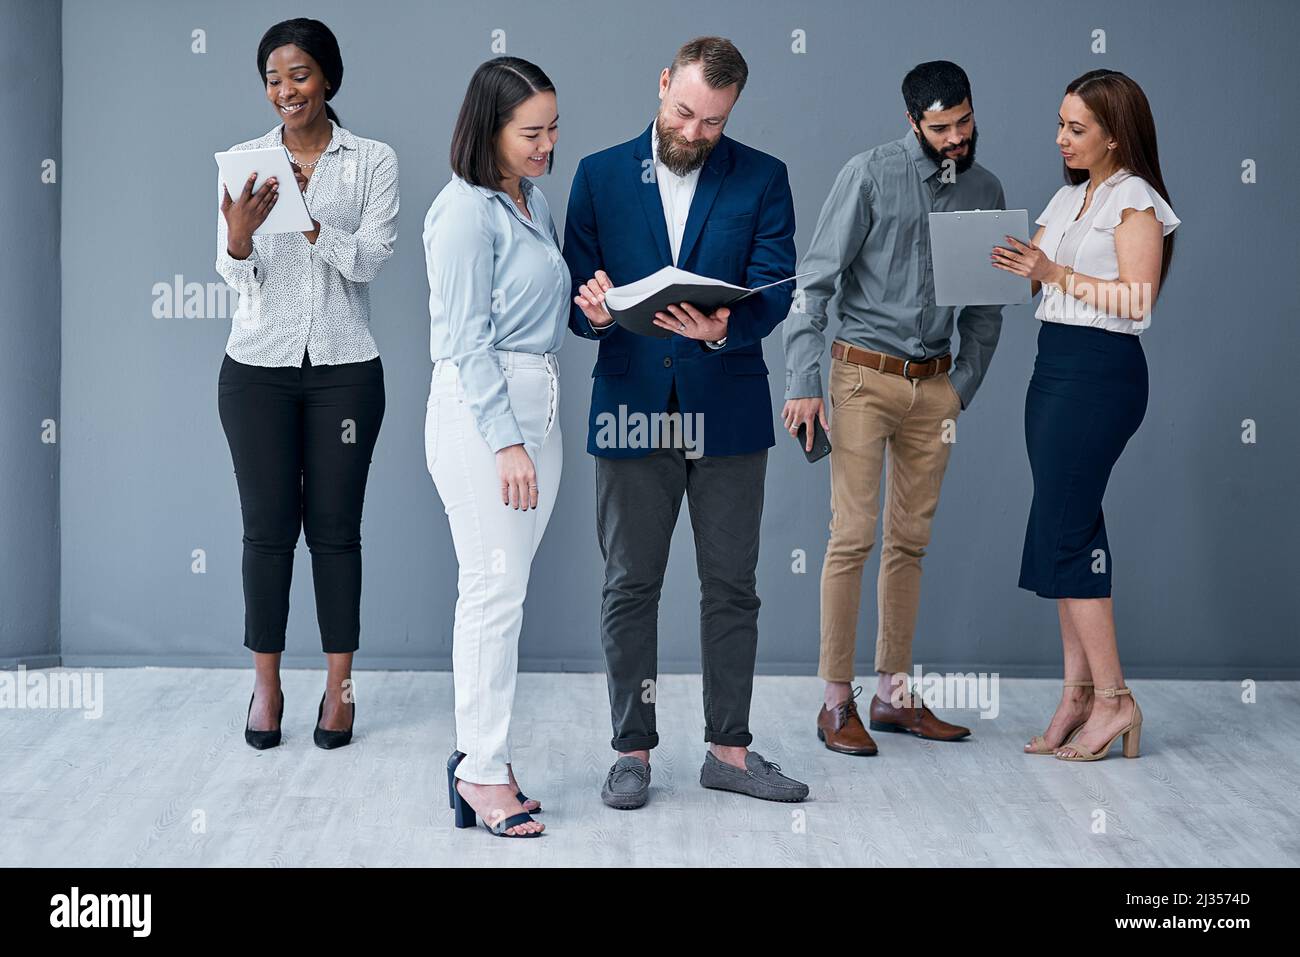 Building collaborative relationships and a cooperative work culture. Shot of a group of businesspeople working against a grey background. Stock Photo